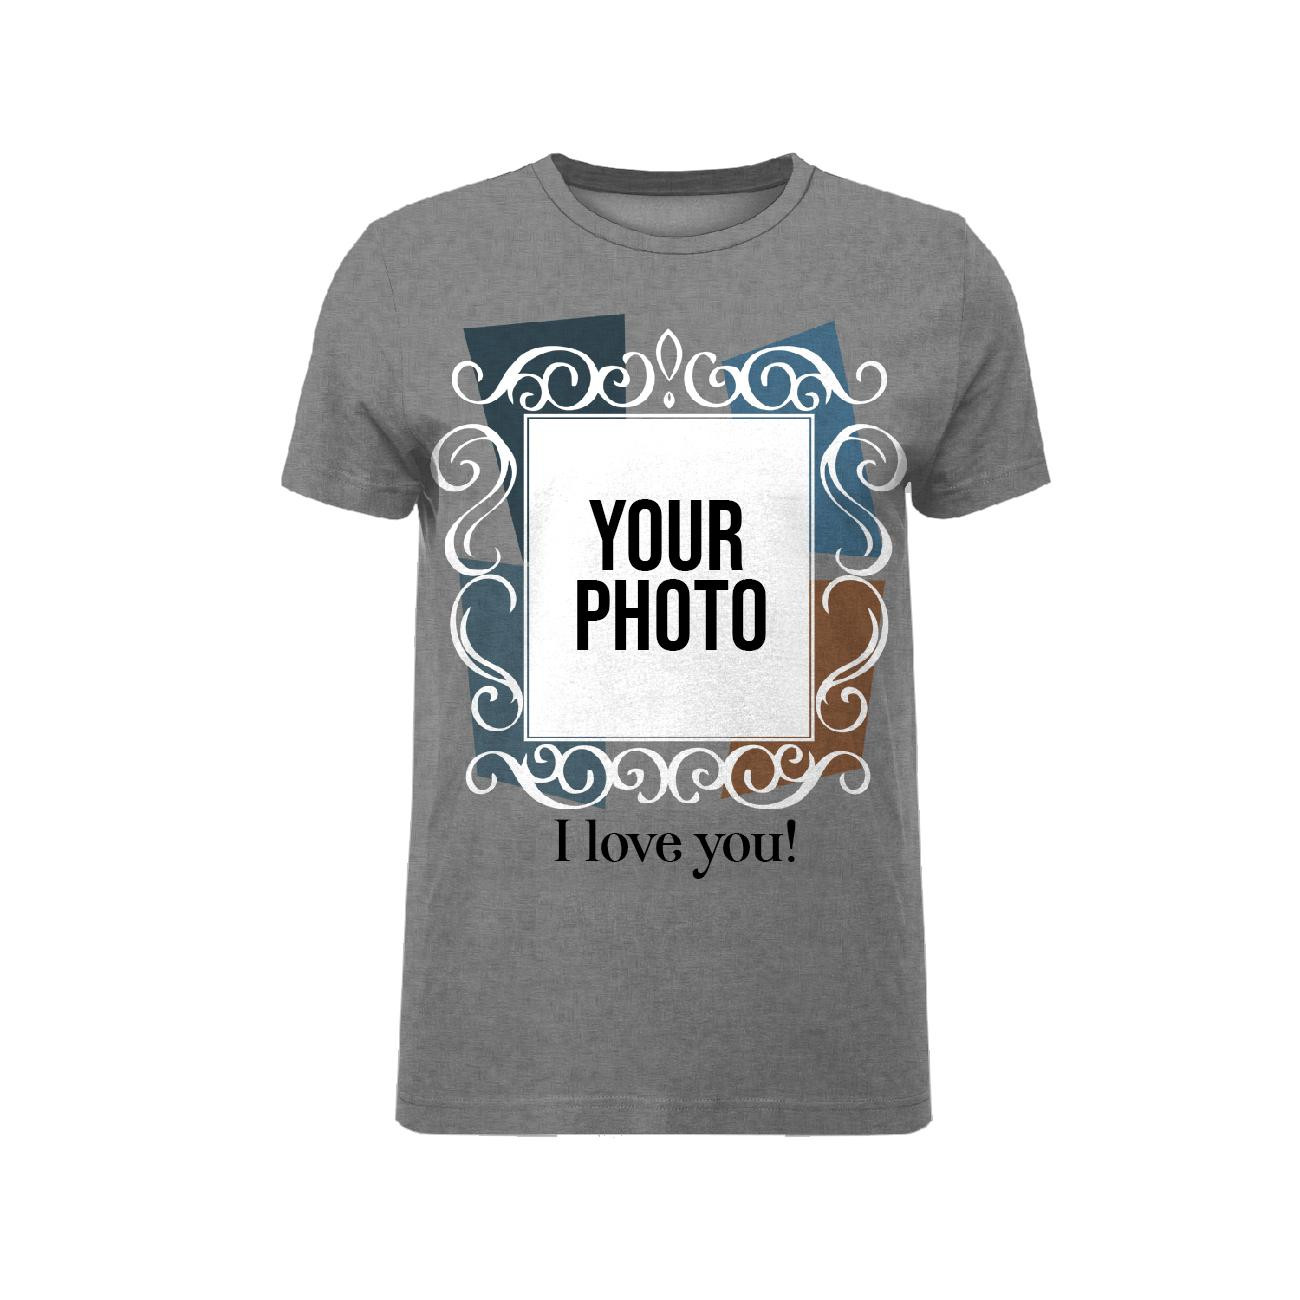 MEN'S T-SHIRT - I LOVE YOU - WITH YOUR OWN PHOTO - sewing set